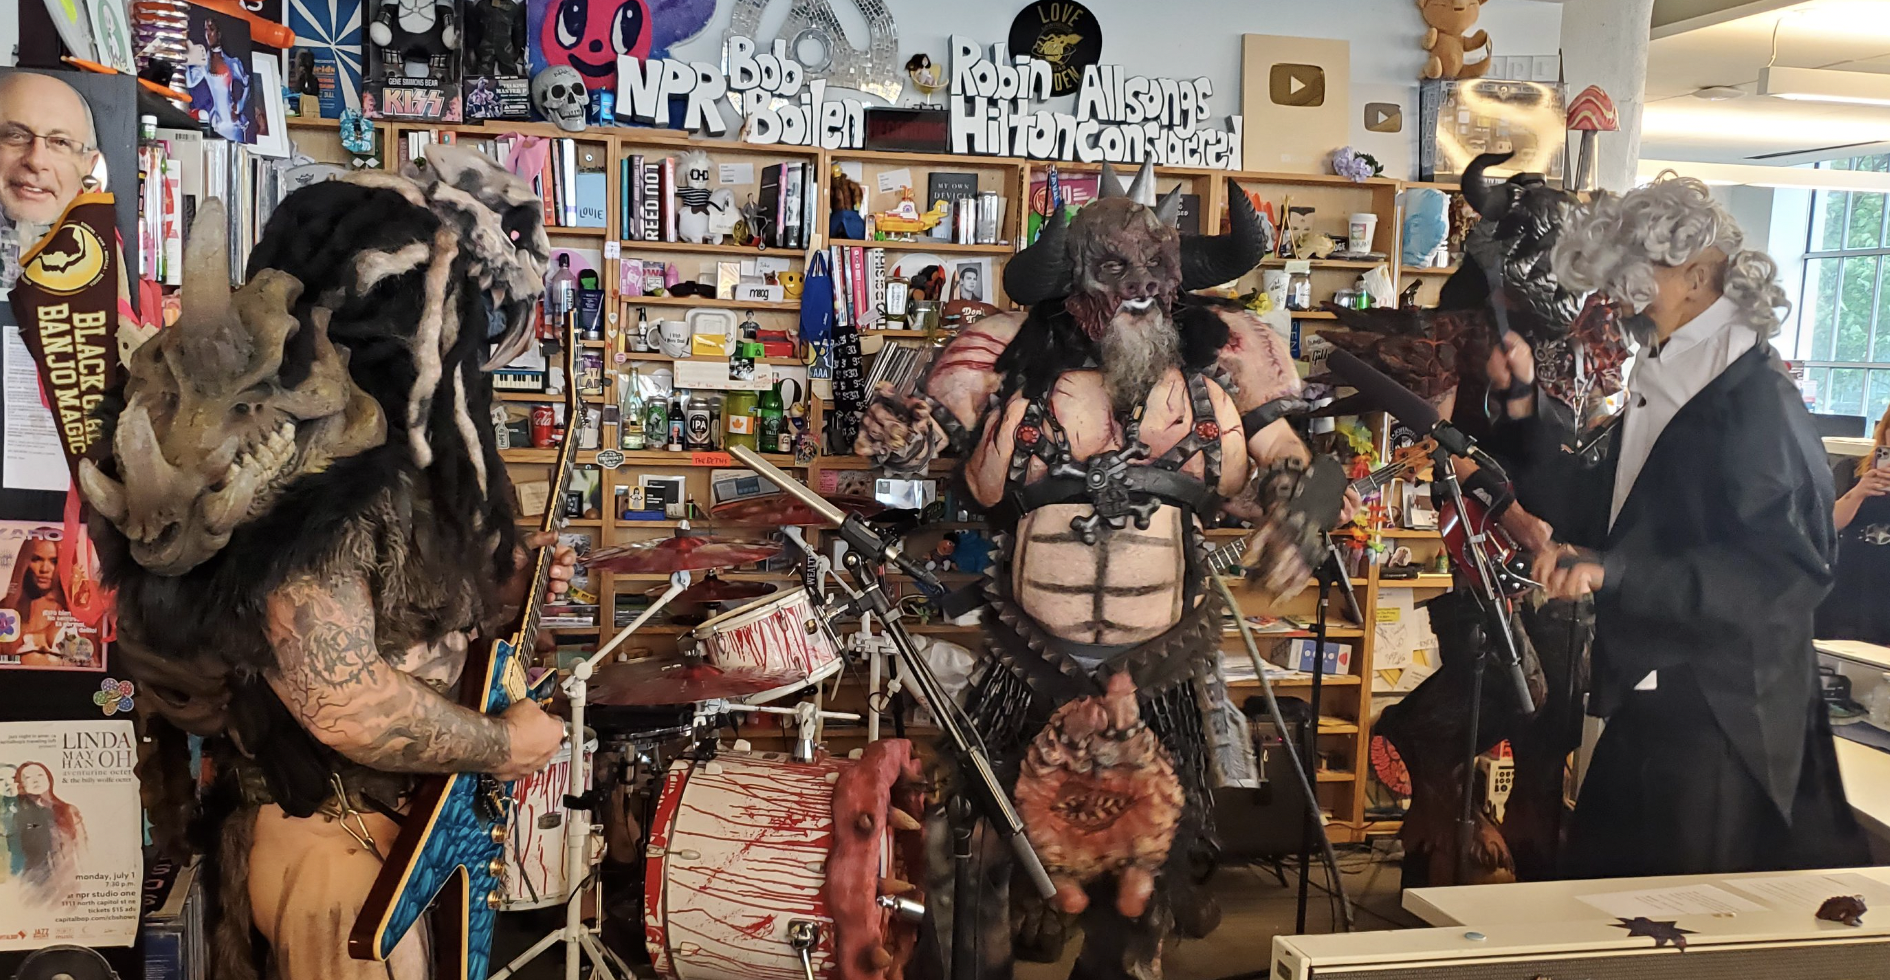 <p>GWAR is a heavy metal band that took the Alice Cooper shock rock formula of fake blood, props, and mock executions as far as it could go, aided in part by costumes that fully obscured the band members' identities. Countless people have come and gone through its ranks since frontman David “Oderus Urungus” Brockie founded the group in 1984, but when he passed away in 2014, the band chose to continue, in part because the costumes ensured that no one knew who was onstage anyway. The band will start<a href="https://gwar.net/pages/tour"> its next U.S. tour</a> in June.</p>